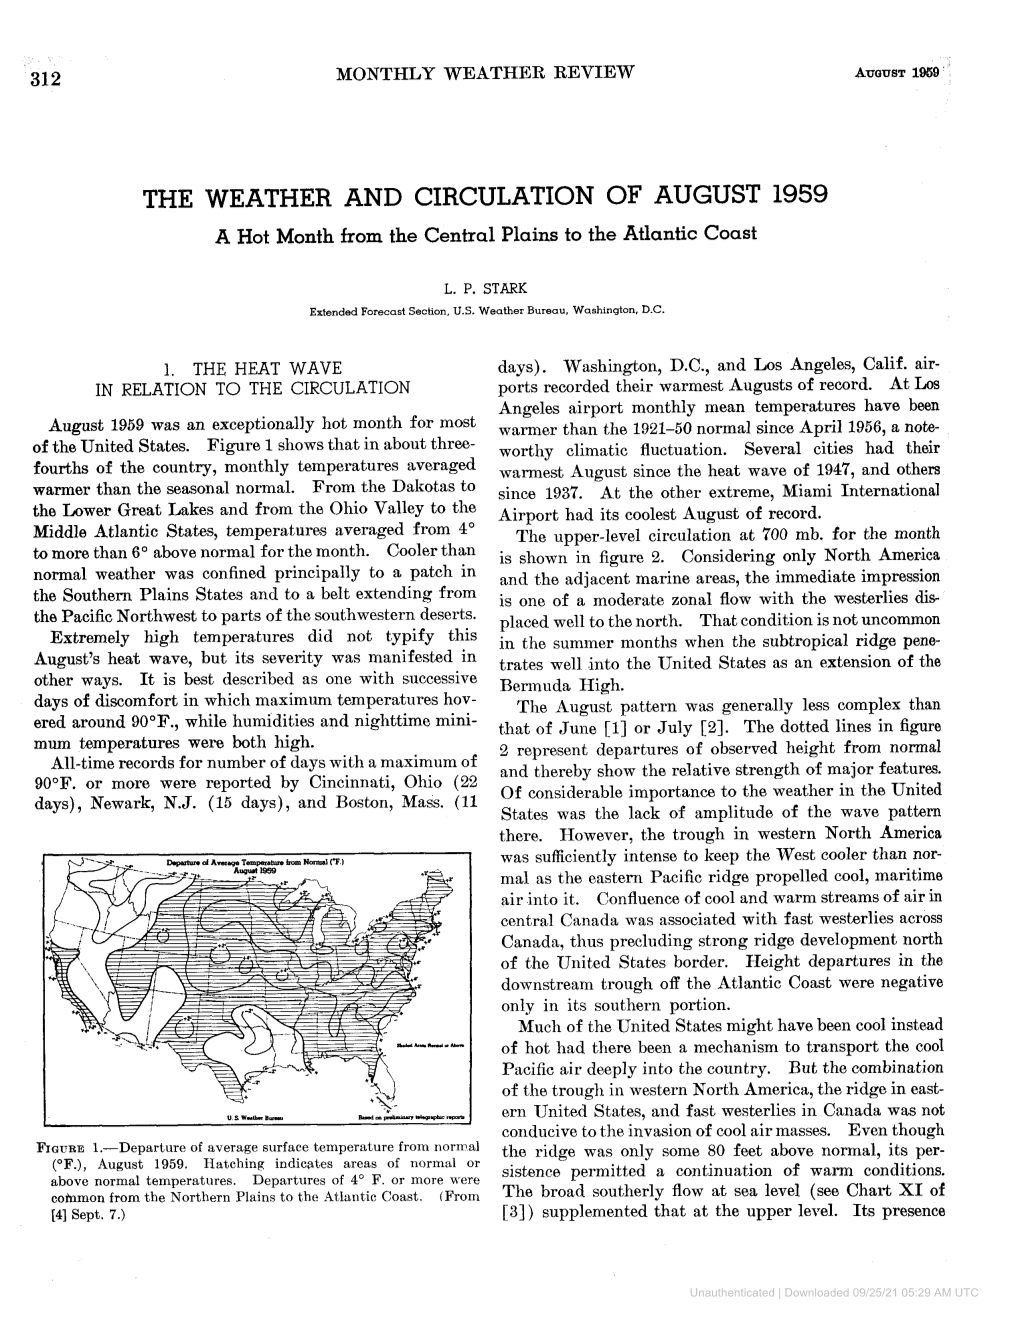 THE WEATHER and CIRCULATION of AUGUST 1959 a Hot Month from the Central Plains to the Atlantic Coast